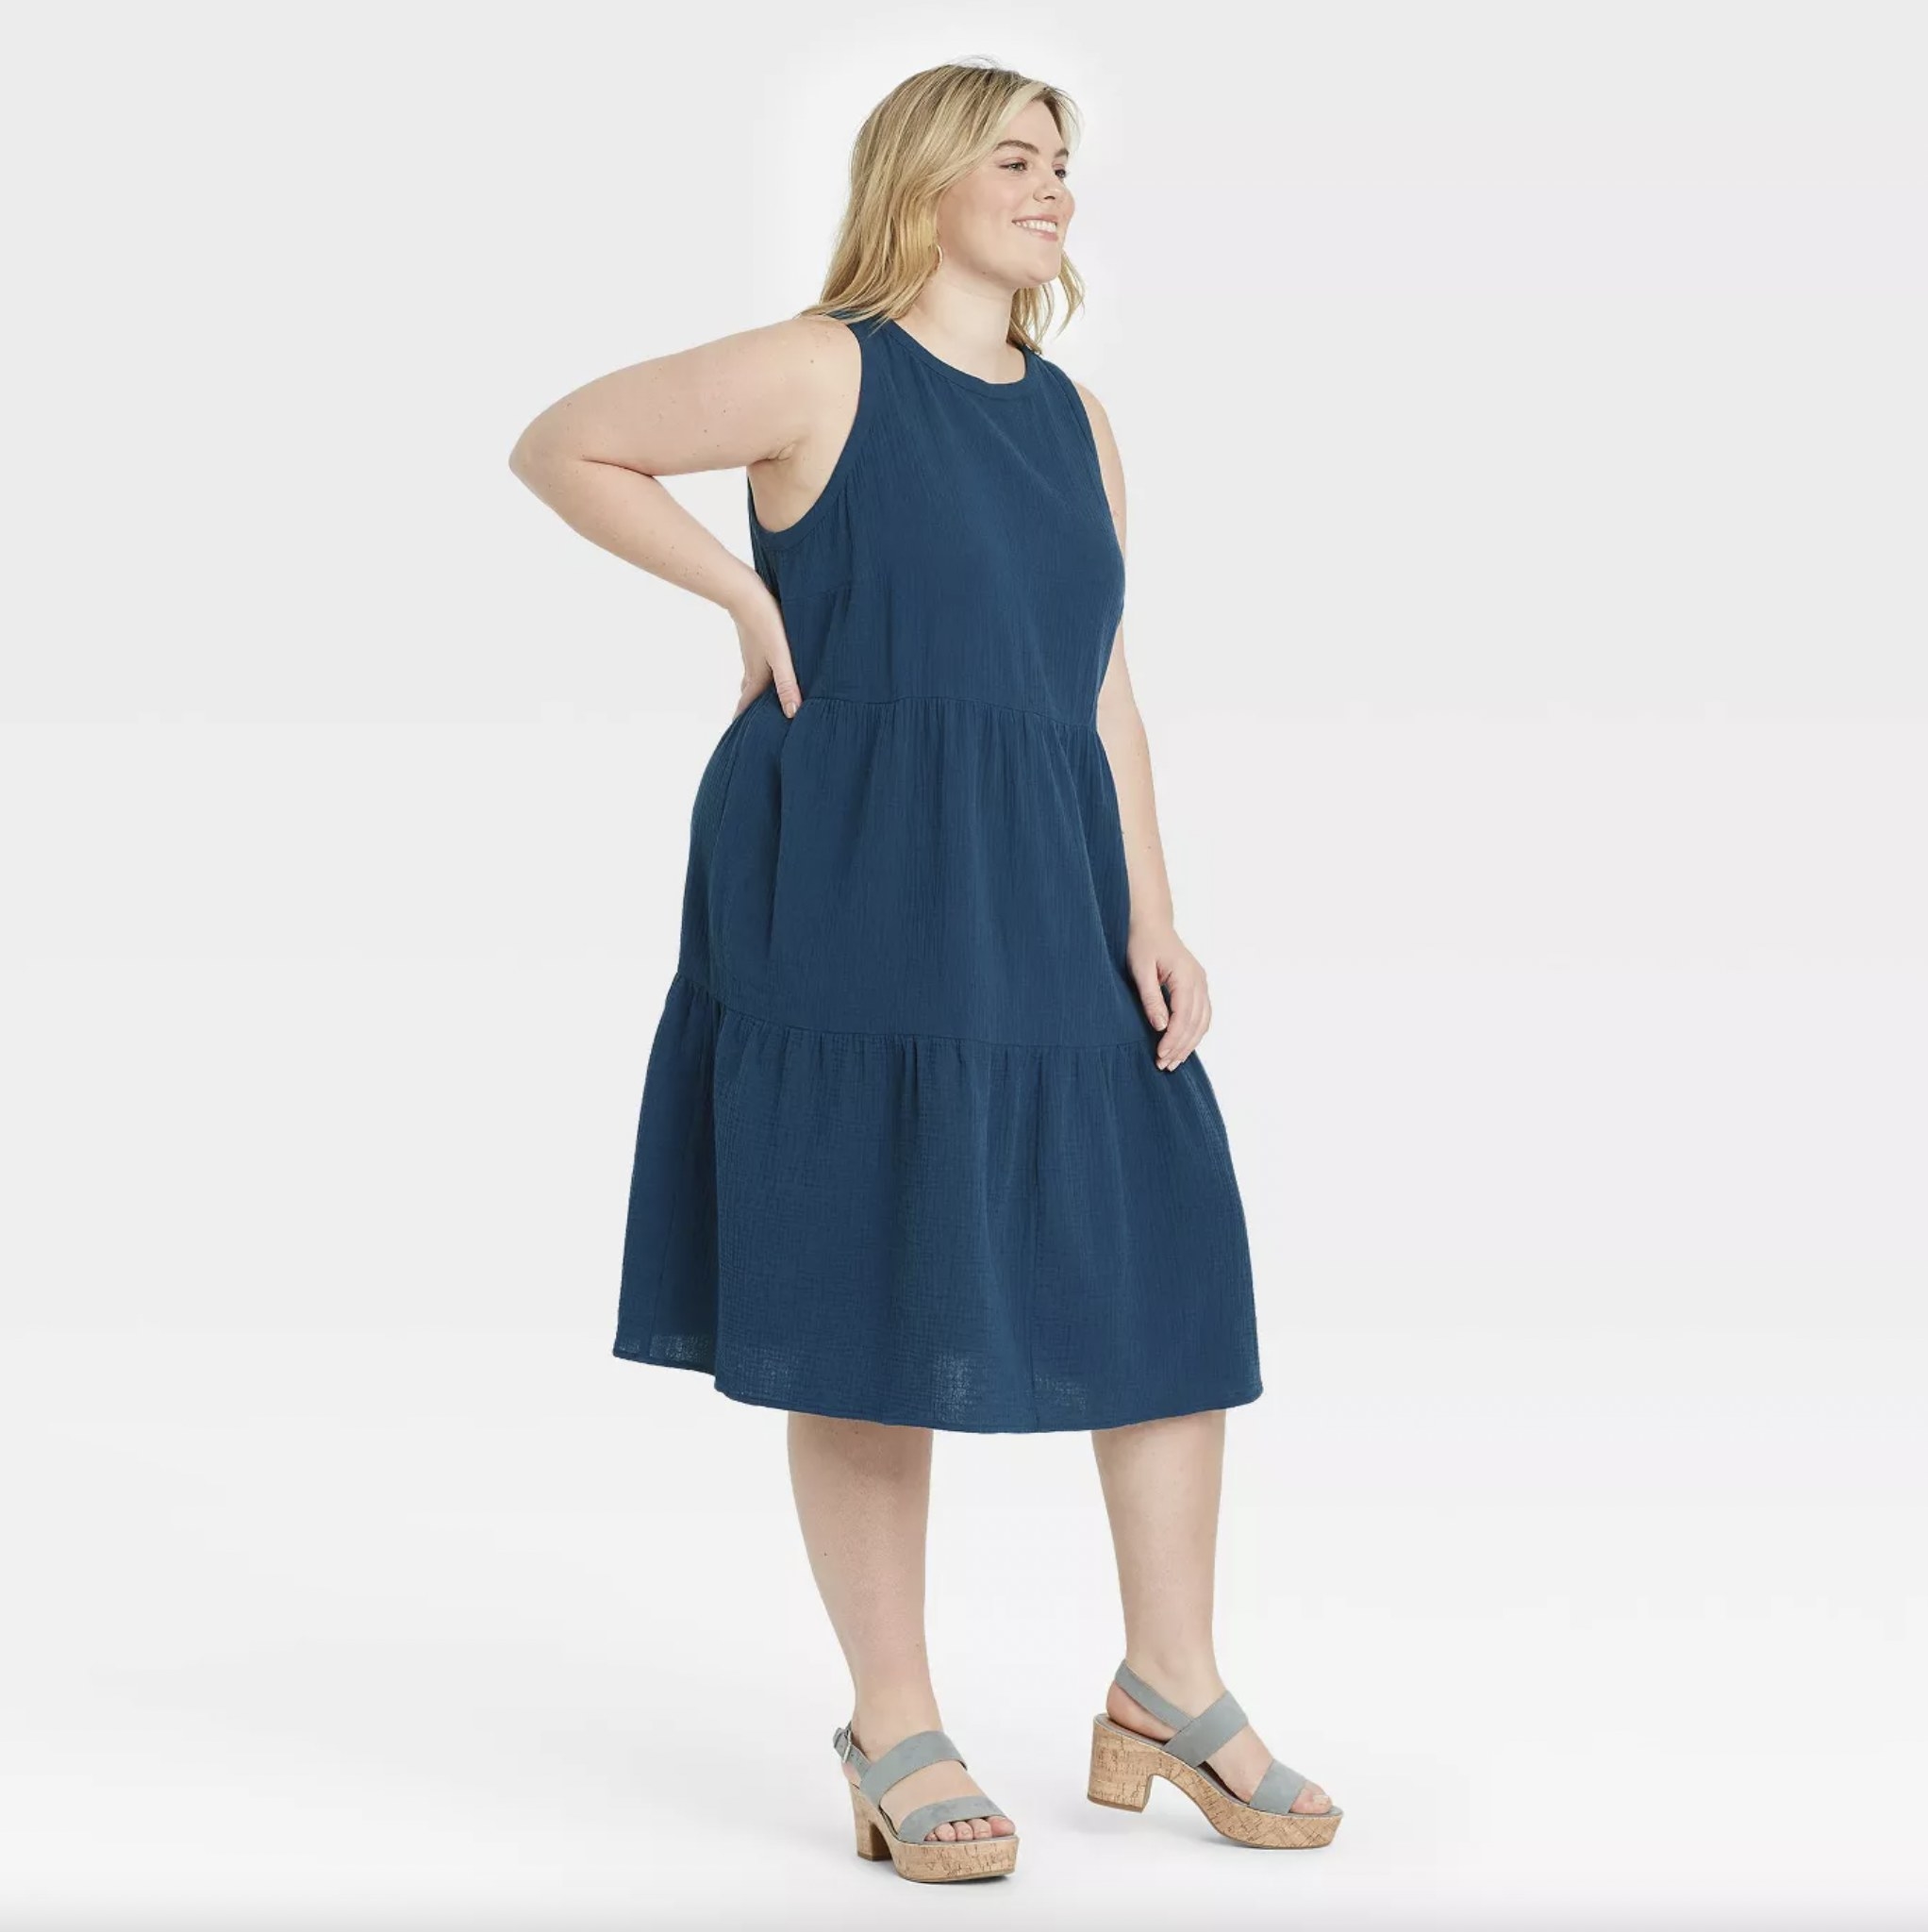 The navy blue tiered dress